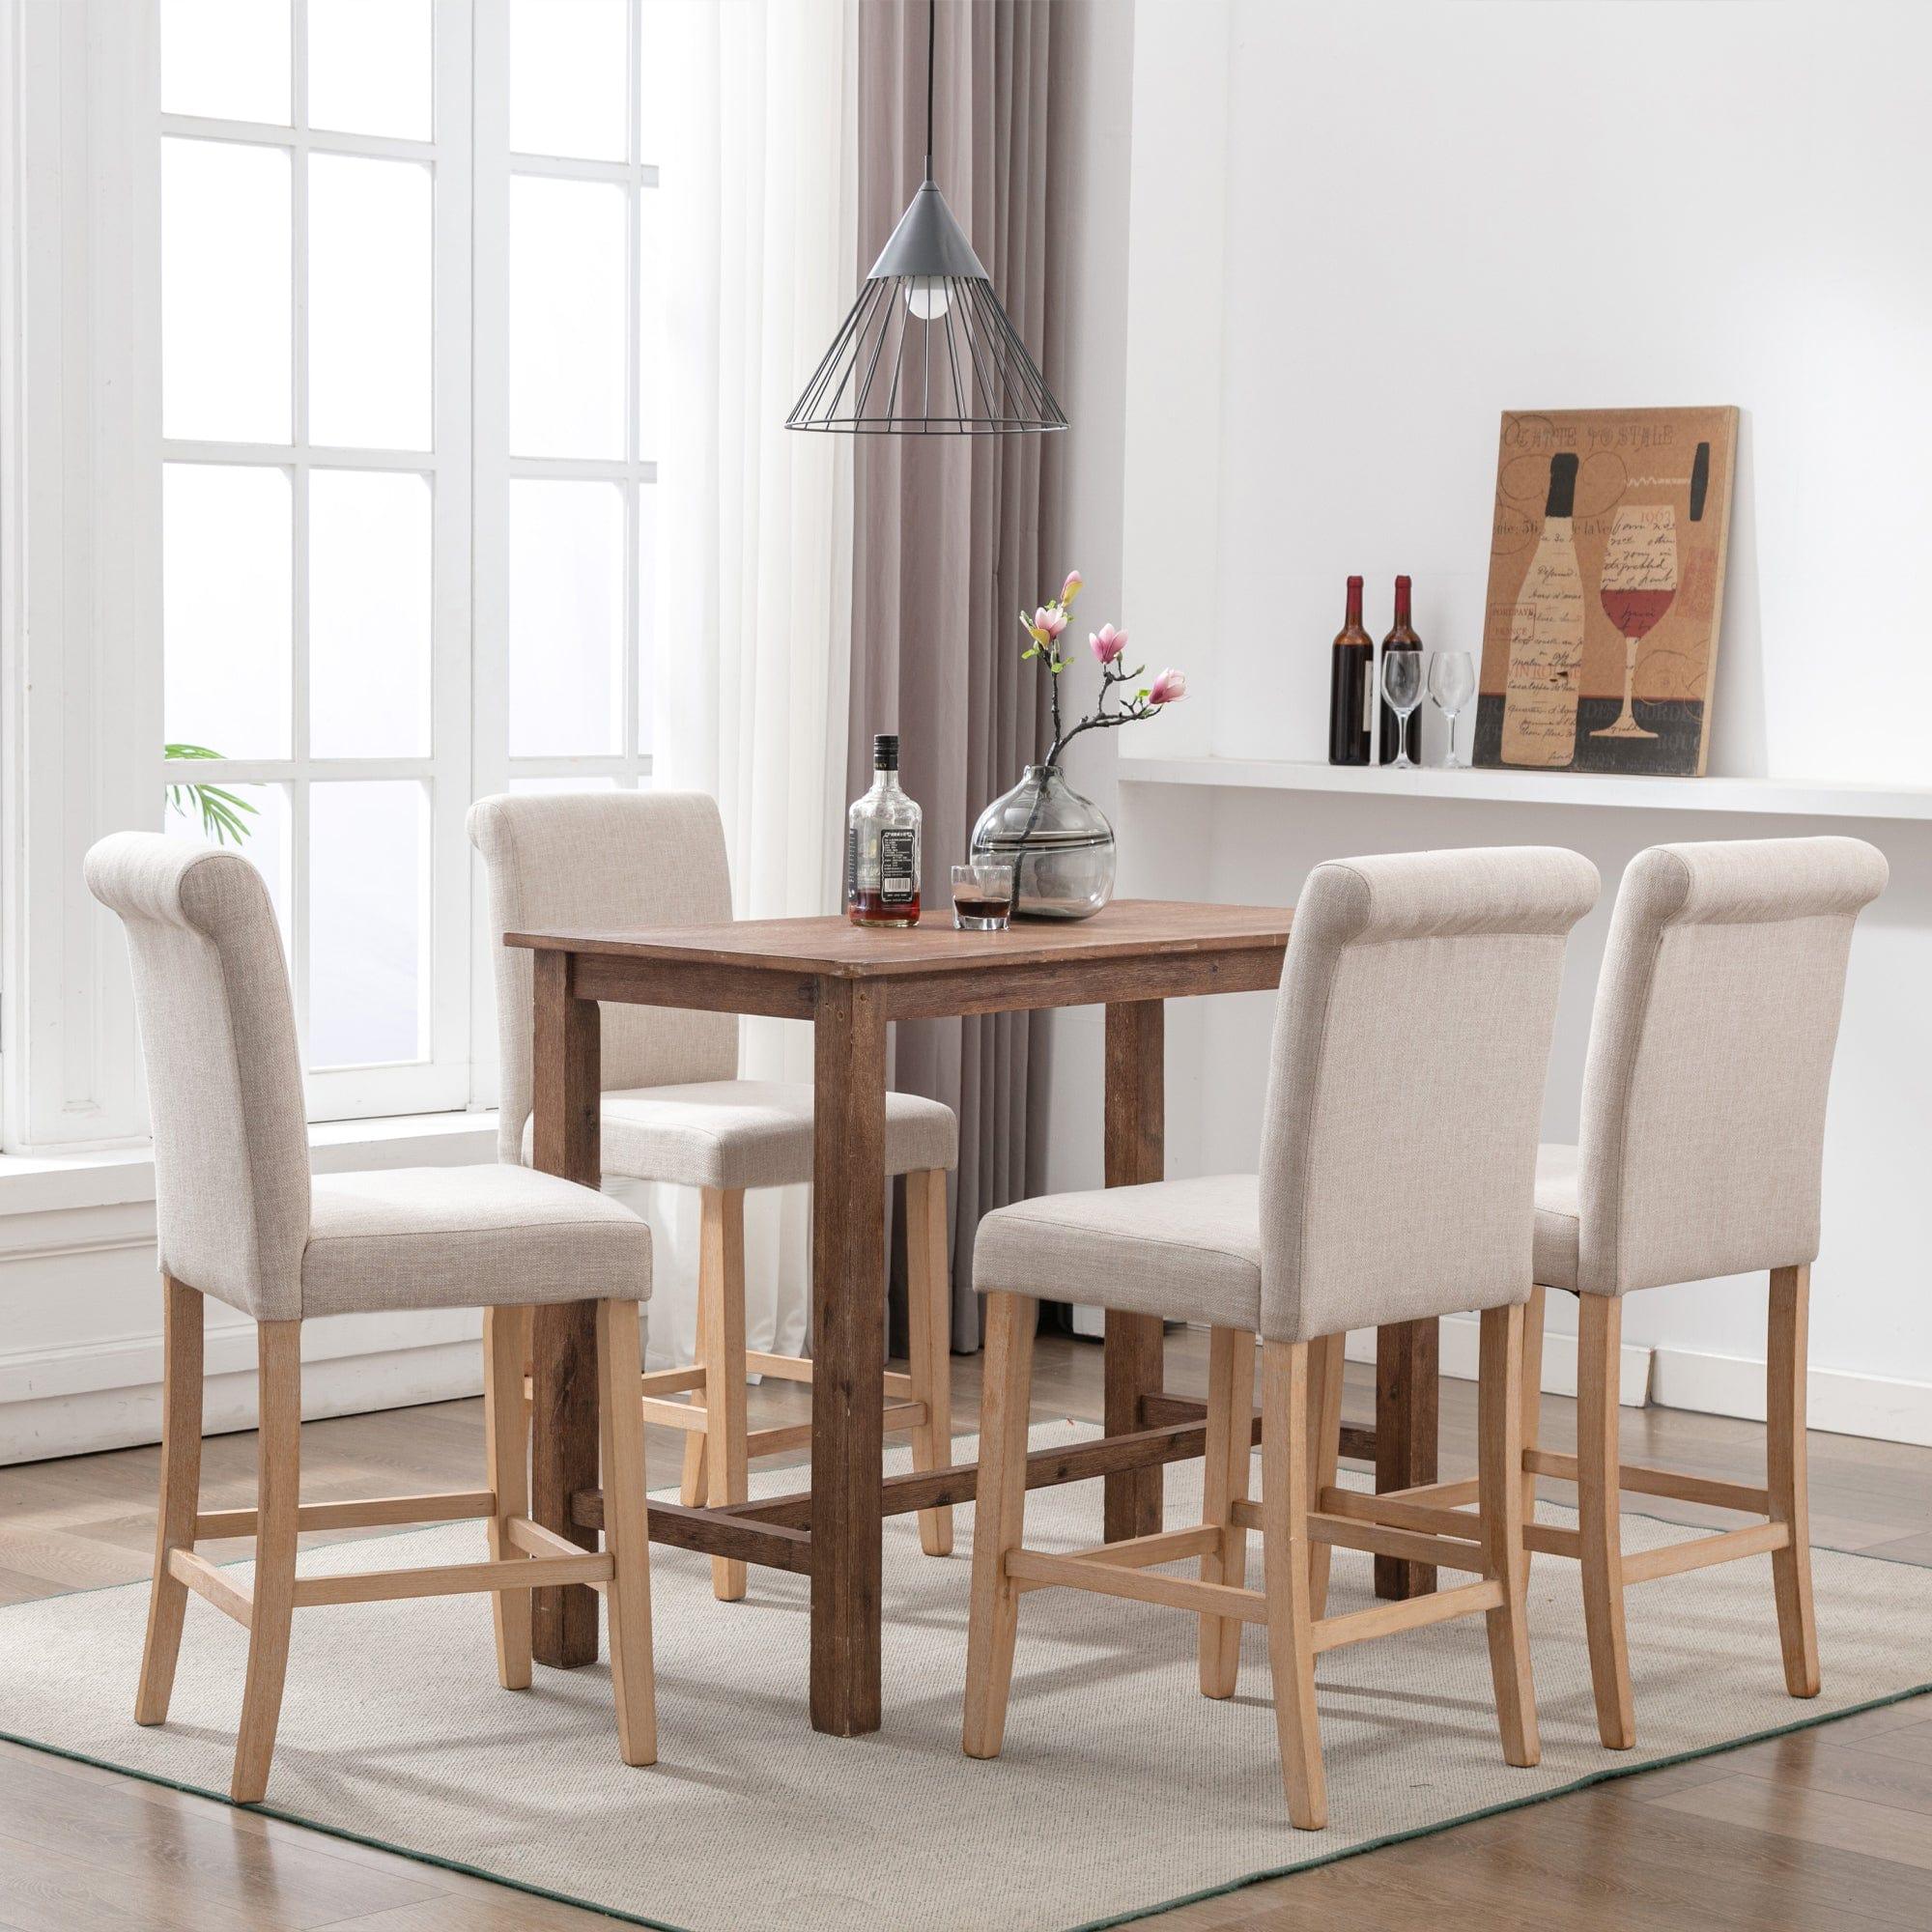 Shop Hengming Set of 2 Bar Stools Soft Cushions with Solid Wood Legs(Beige) Mademoiselle Home Decor